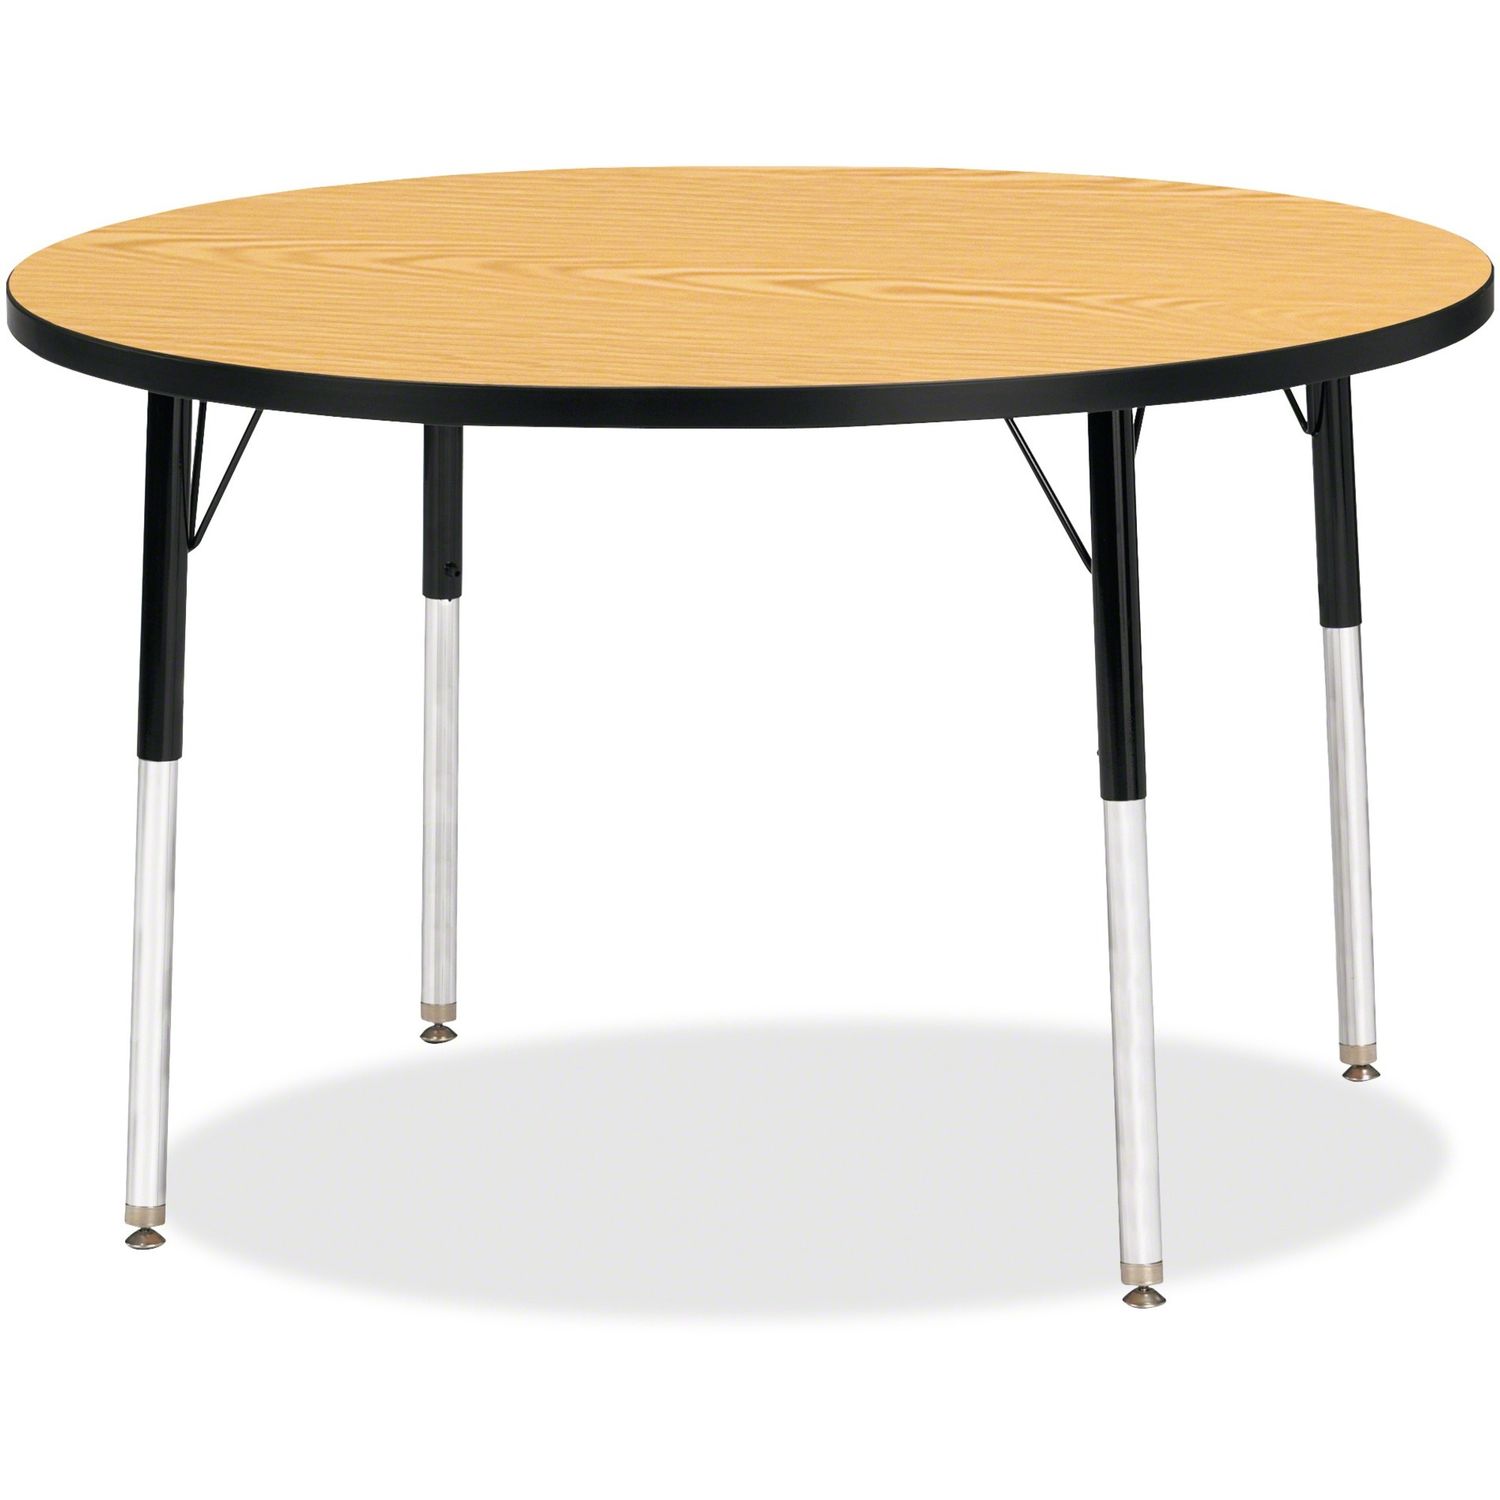 Berries Adult Height Color Top Round Table Black Oak Round, Laminated Top, Four Leg Base, 4 Legs, 1.13" Table Top Thickness x 42" Table Top Diameter, 31" Height, Assembly Required, Powder Coated